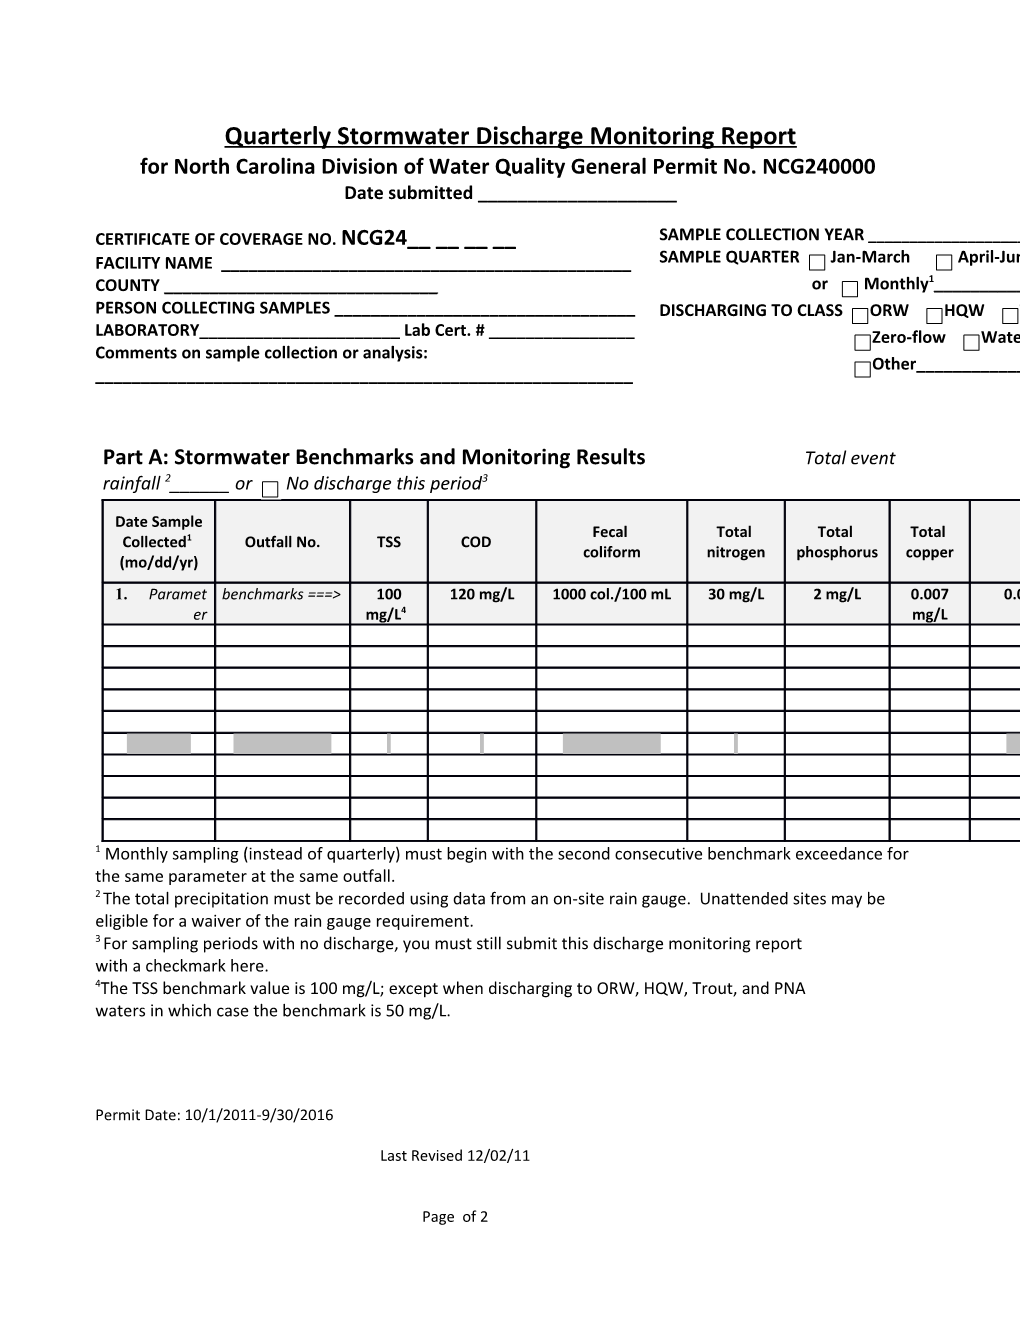 For North Carolina Division of Water Quality General Permit No. NCG240000